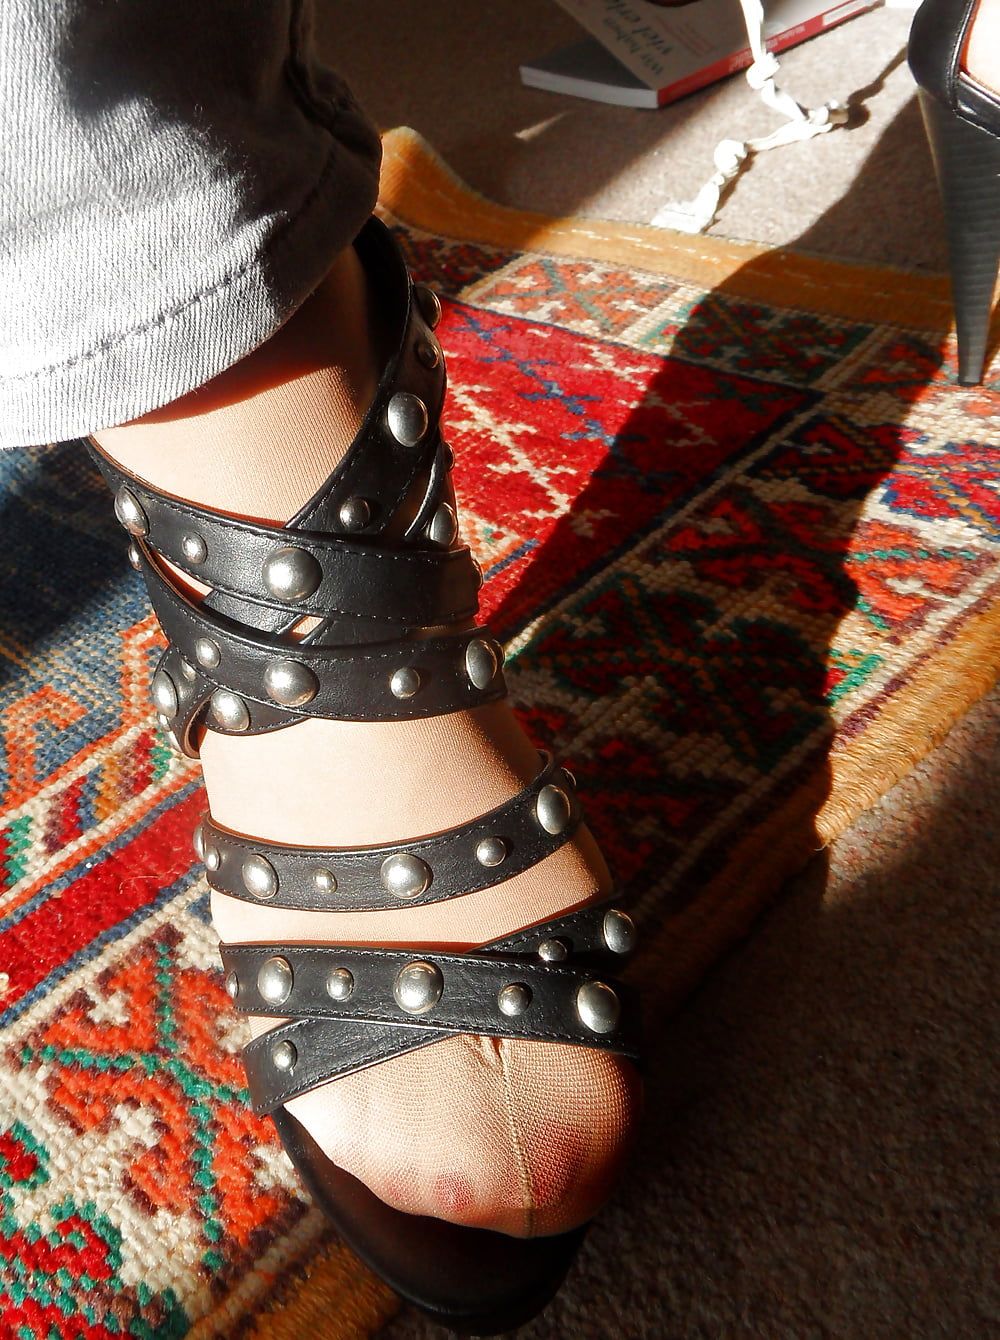 studded high heels of my wife with painted toenails #4